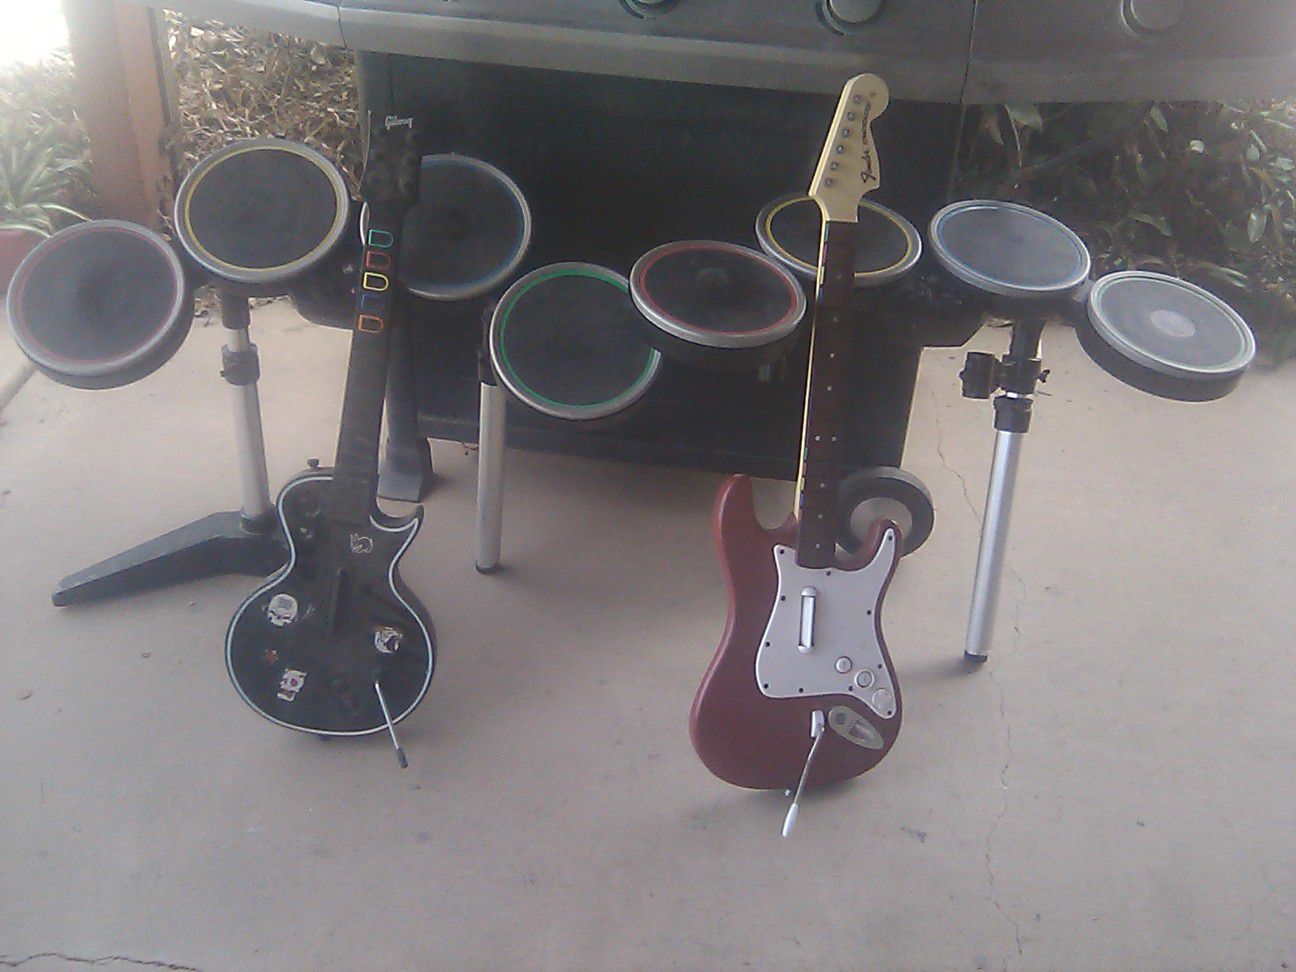 guitar hero, fender Stratocaster PlayStation guitar, and two top drum sets PlayStation. Must sell ASAP